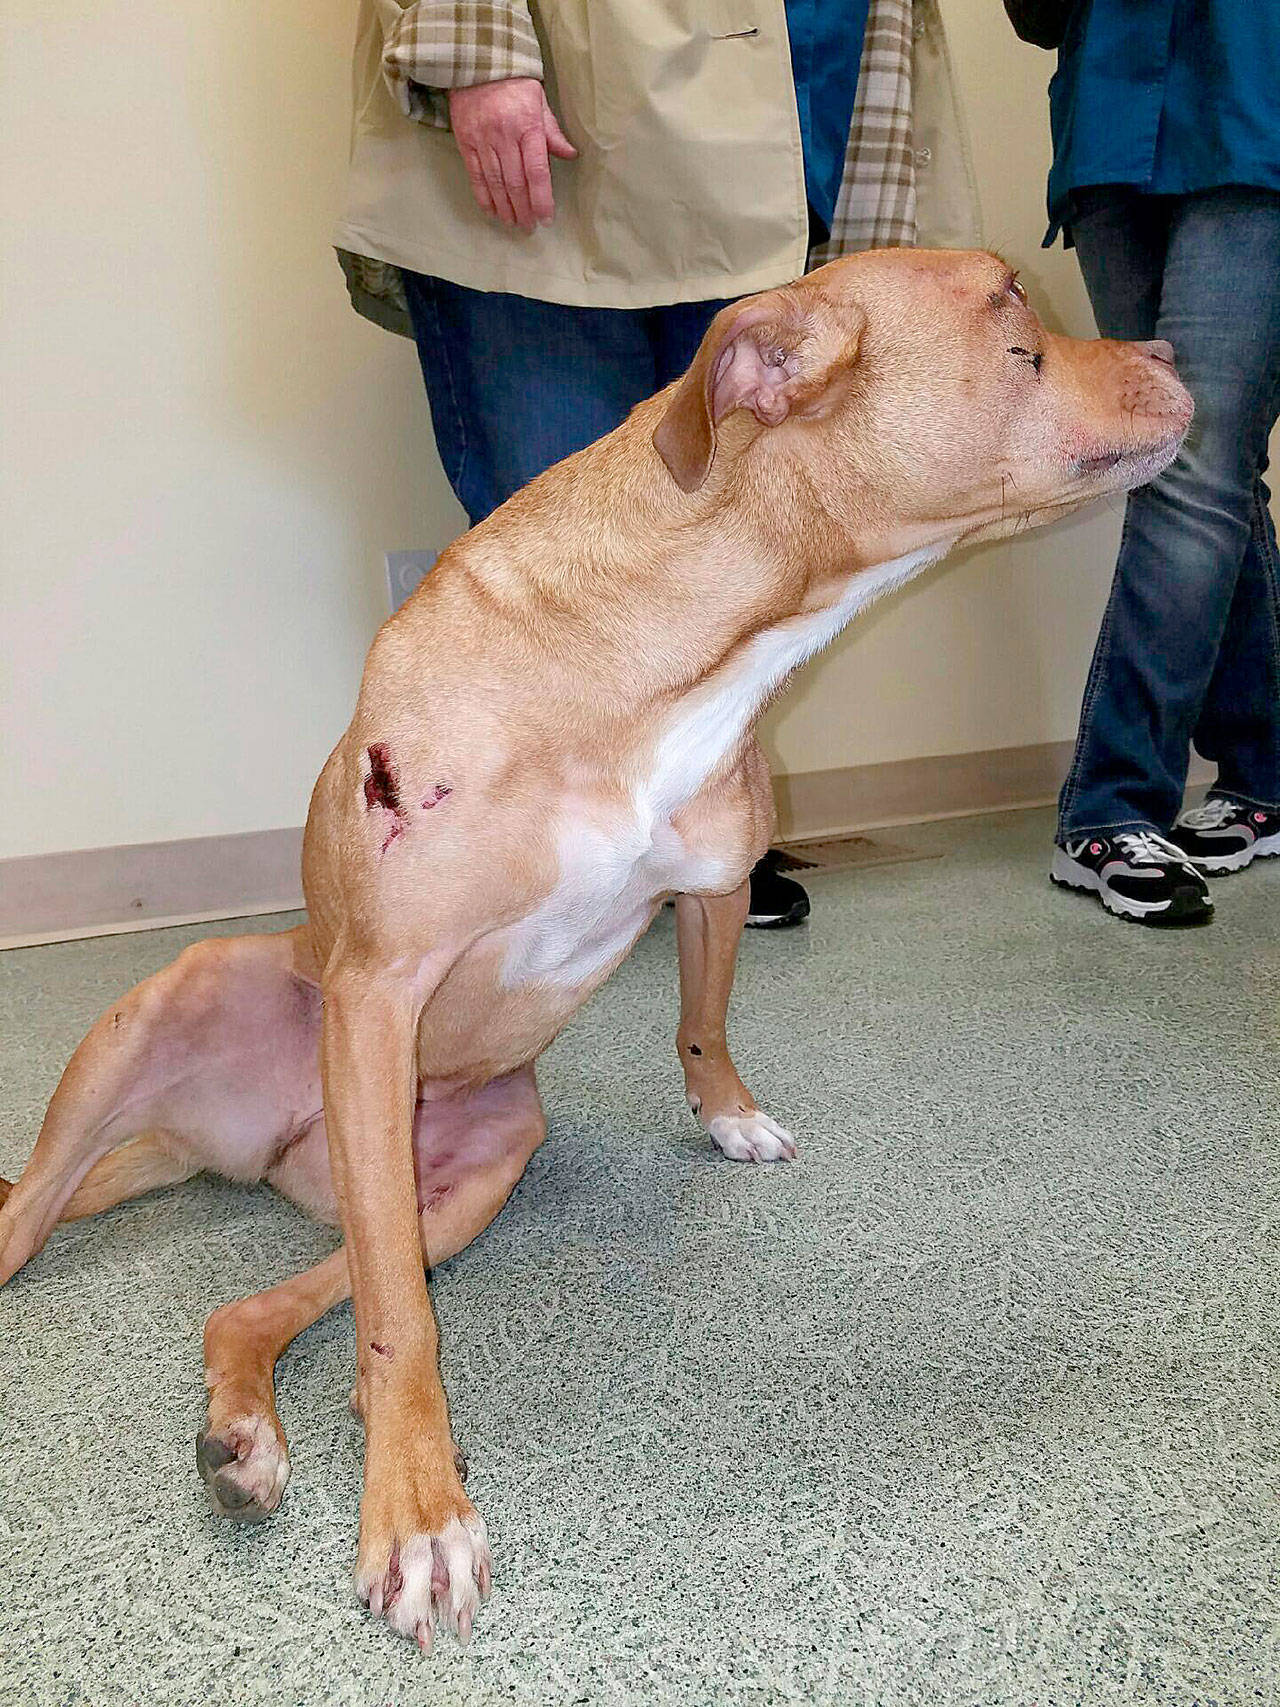 Jessie Stensland / Whidbey News Group — A dog named Daisy is evaluated at the WAIF shelter near Coupeville. The pitbull was euthanized after suffering massive injuries from being thrown from a vehicle and struck by vehicles.